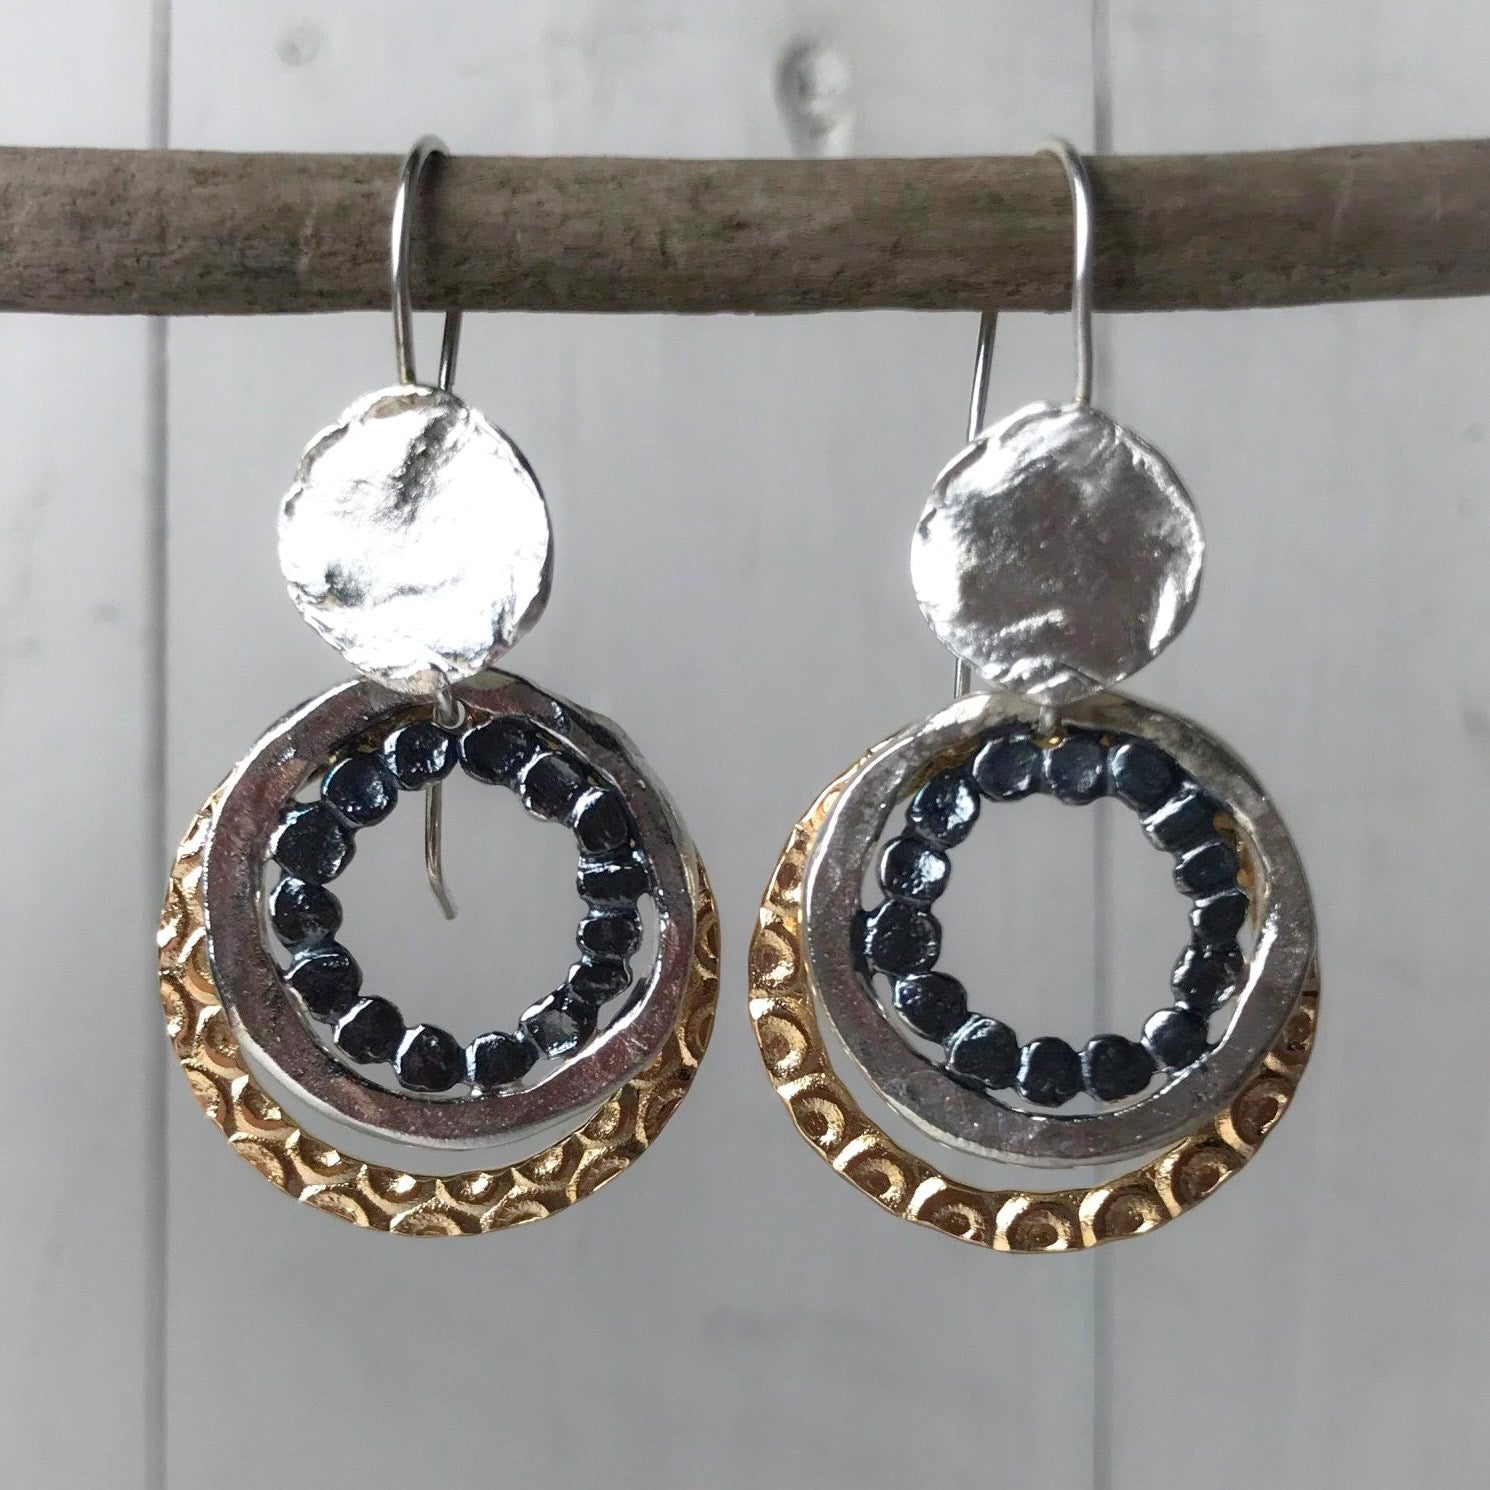 Silver and Gold Hoop Earrings - The Nancy Smillie Shop - Art, Jewellery & Designer Gifts Glasgow